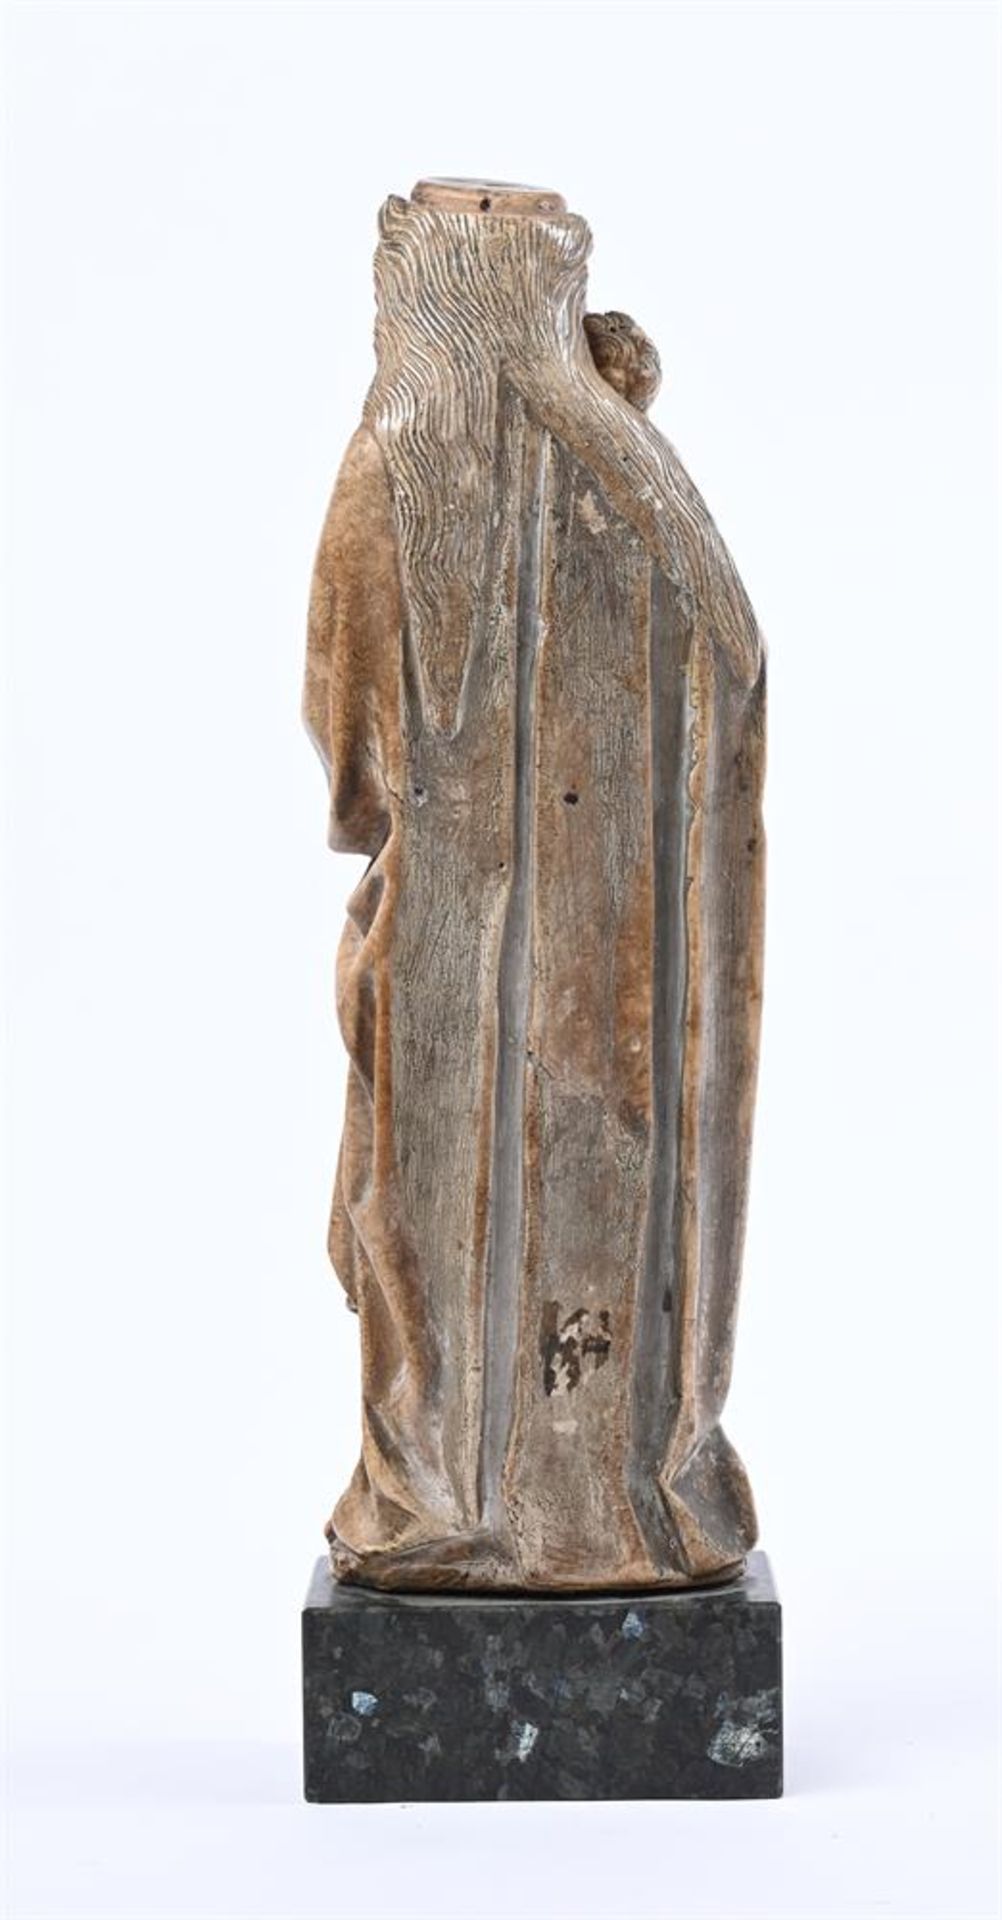 A GOTHIC CARVED ALABASTER FIGURE OF THE VIRGIN AND CHILD, 14TH CENTURY - Image 9 of 9